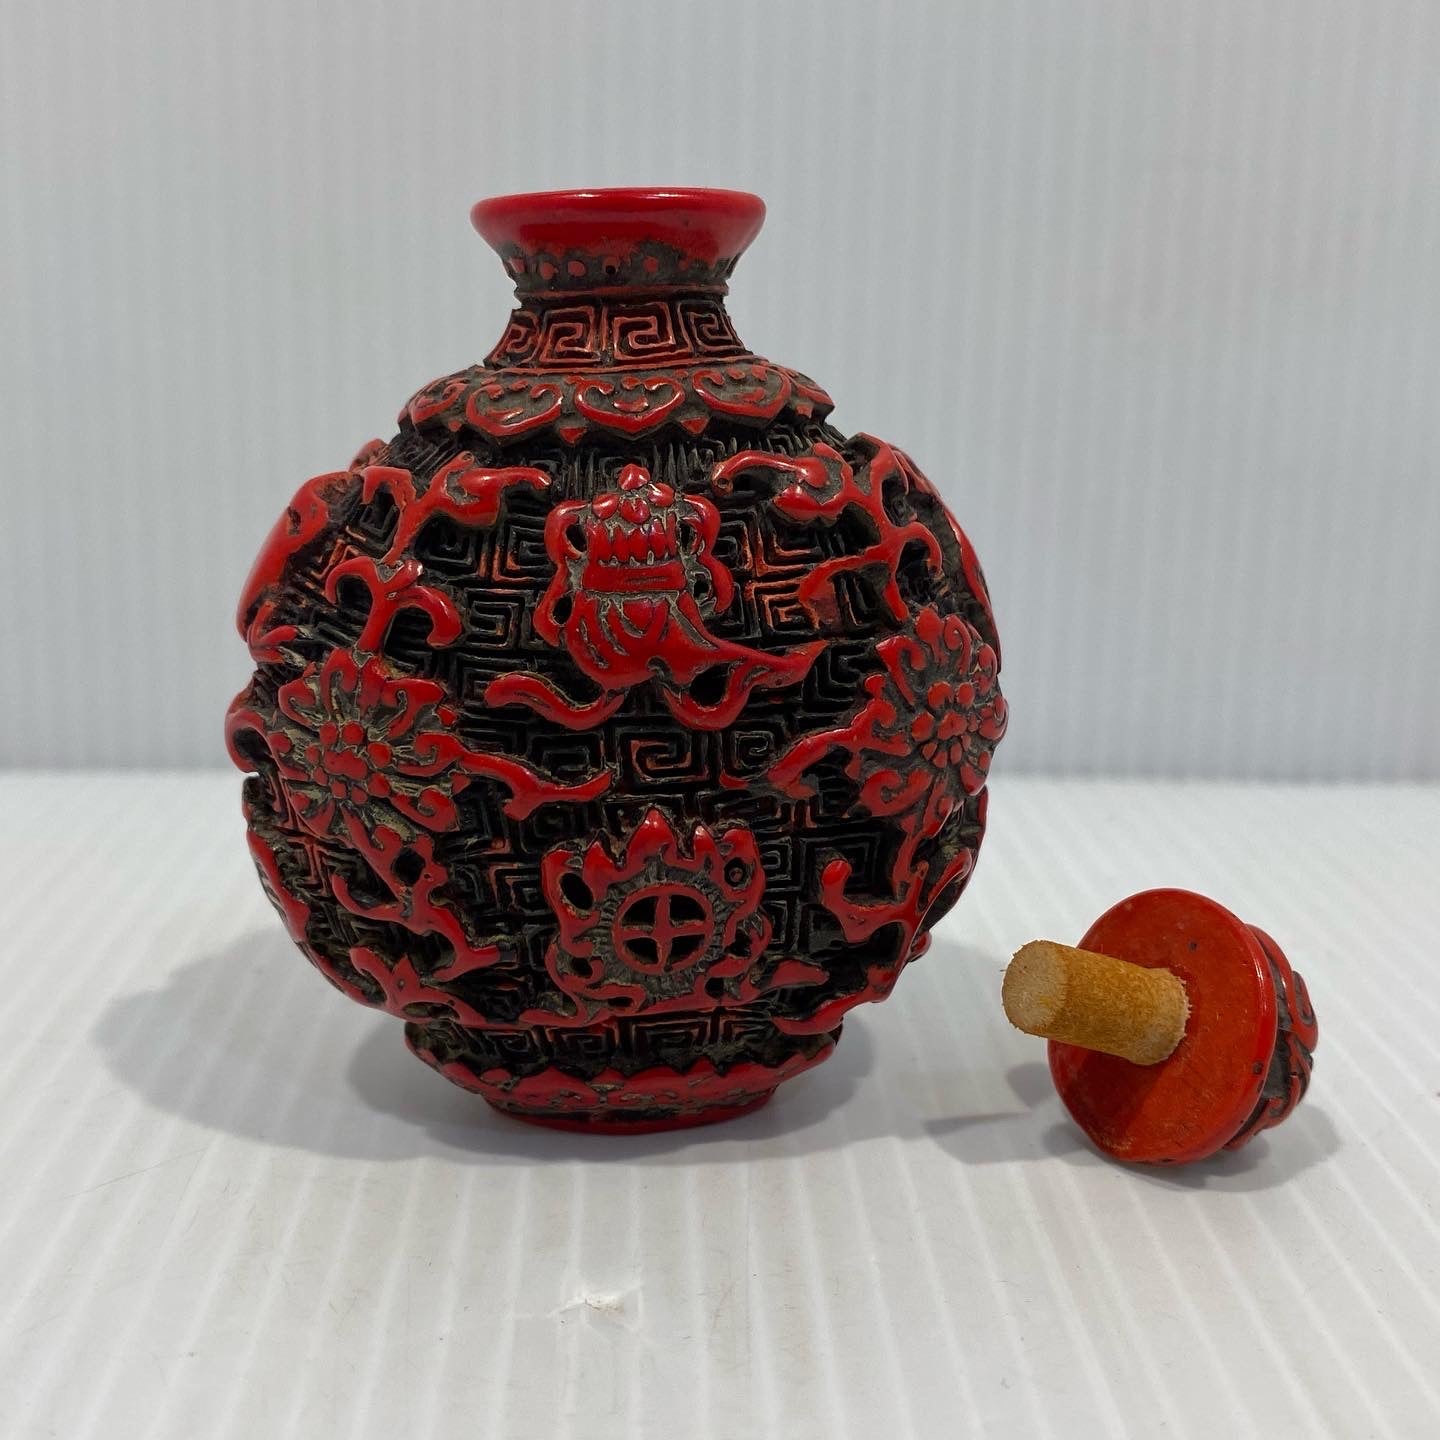 Antique Chinese Cinnabar lacquer snuff bottle, carved  with Buddha Symbols. Original stopper. Early 20th century.